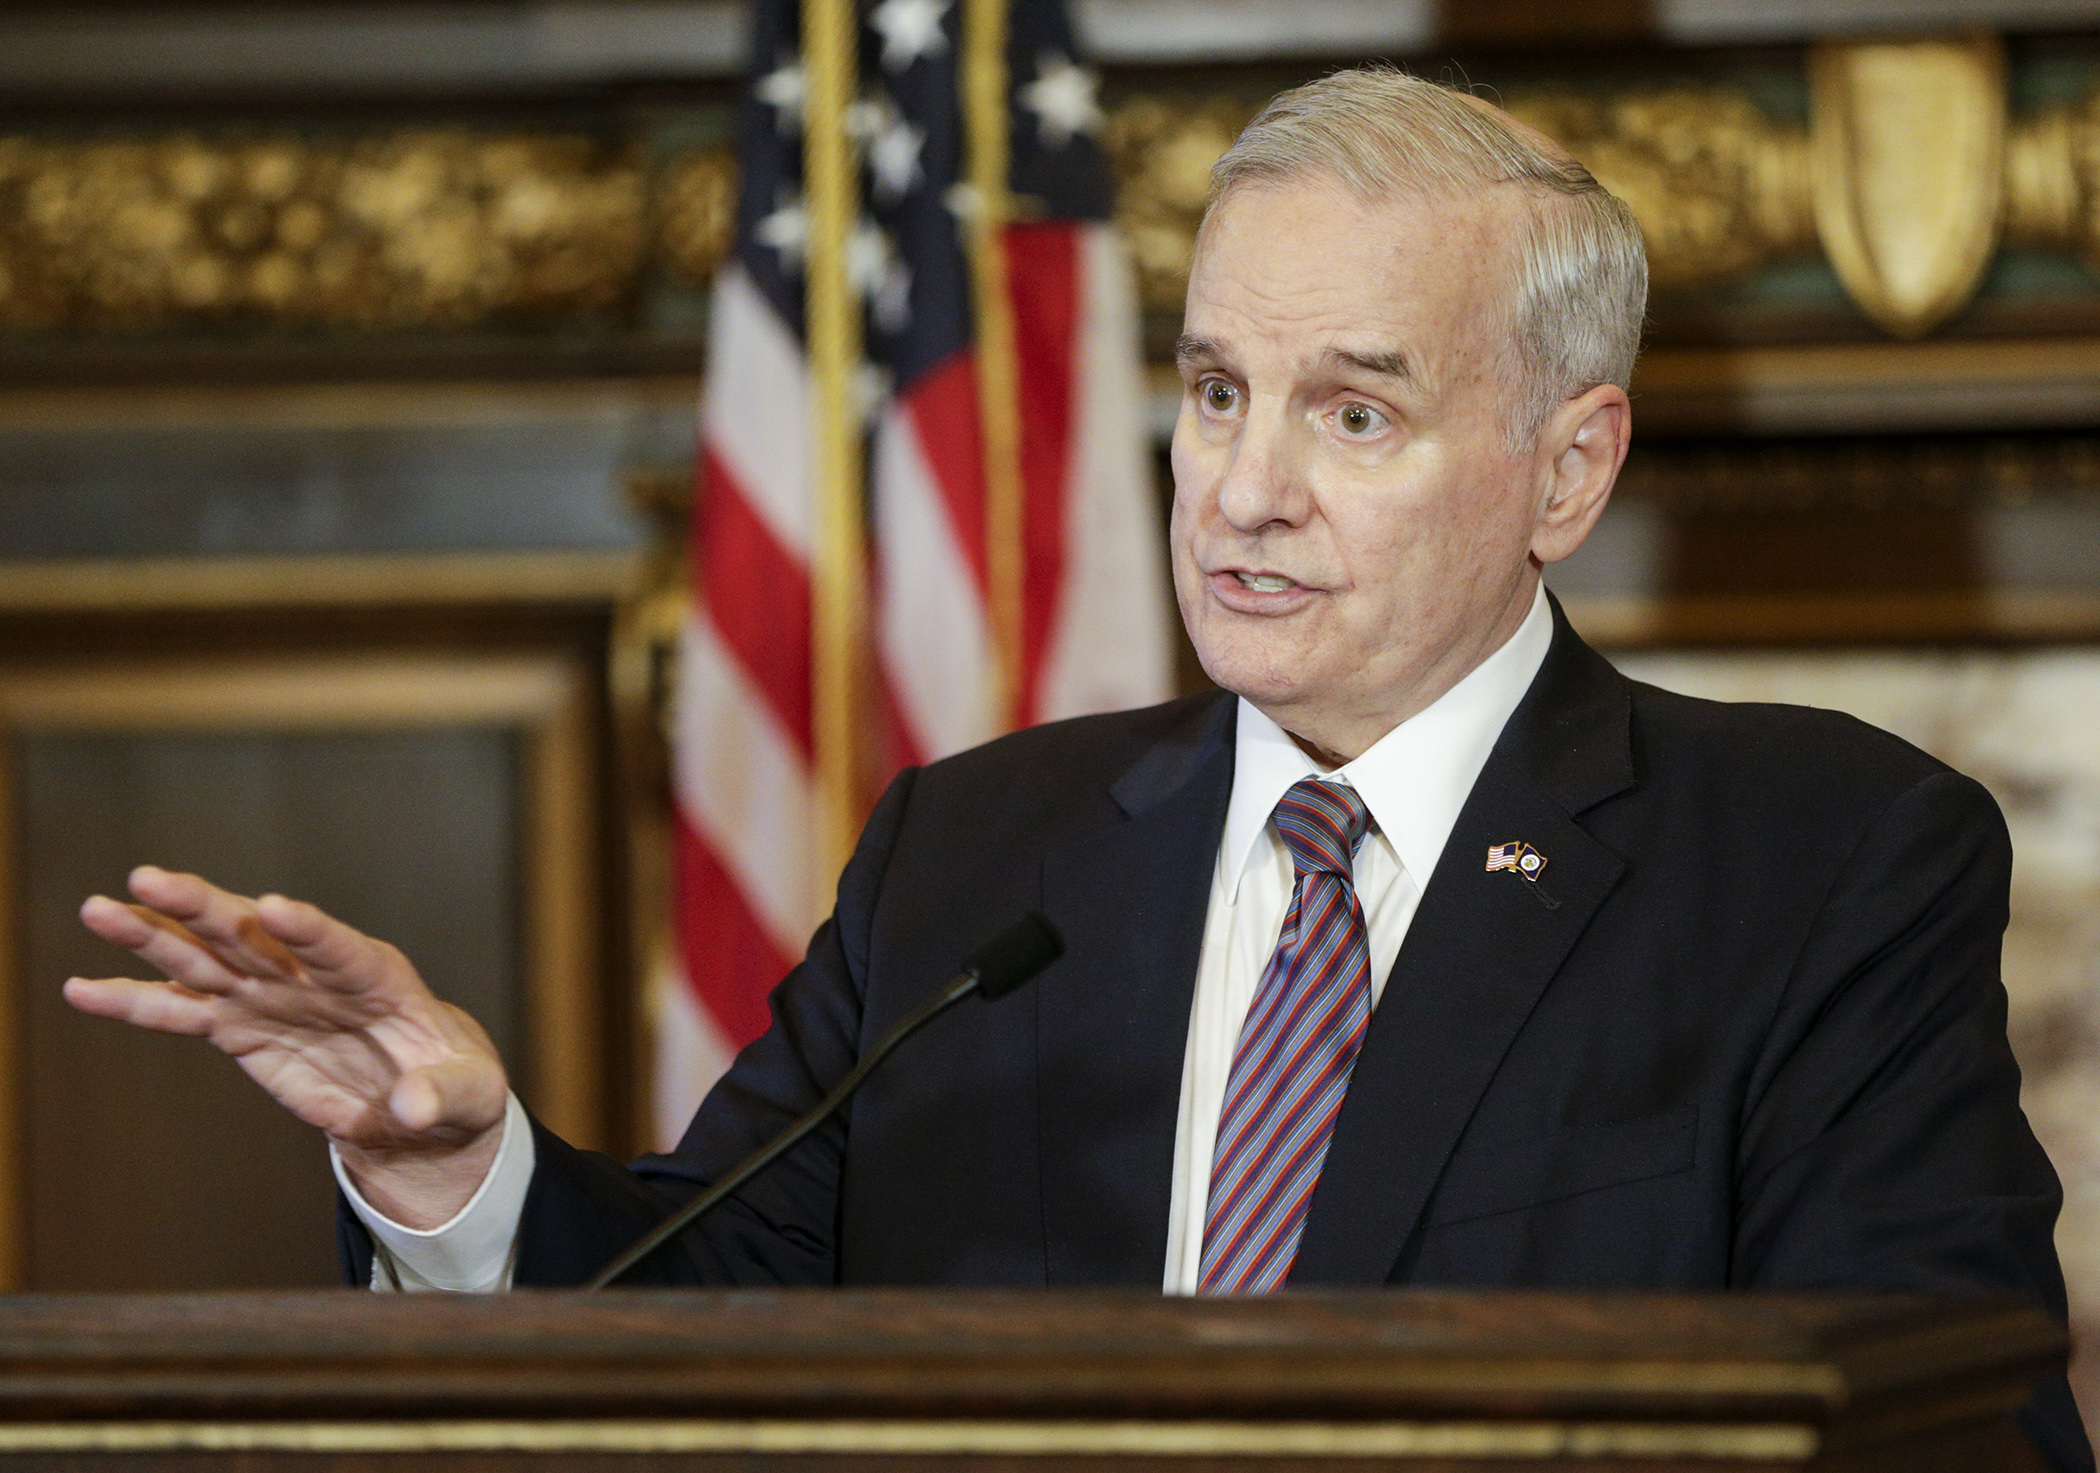 Gov. Mark Dayton speaks to the press June 9 about the repercussions of rescinding the tobacco tax inflator and his hope to meet with legislators to talk about some of the provisions to which he objects in budget bills he signed May 30. Photo by Paul Battaglia